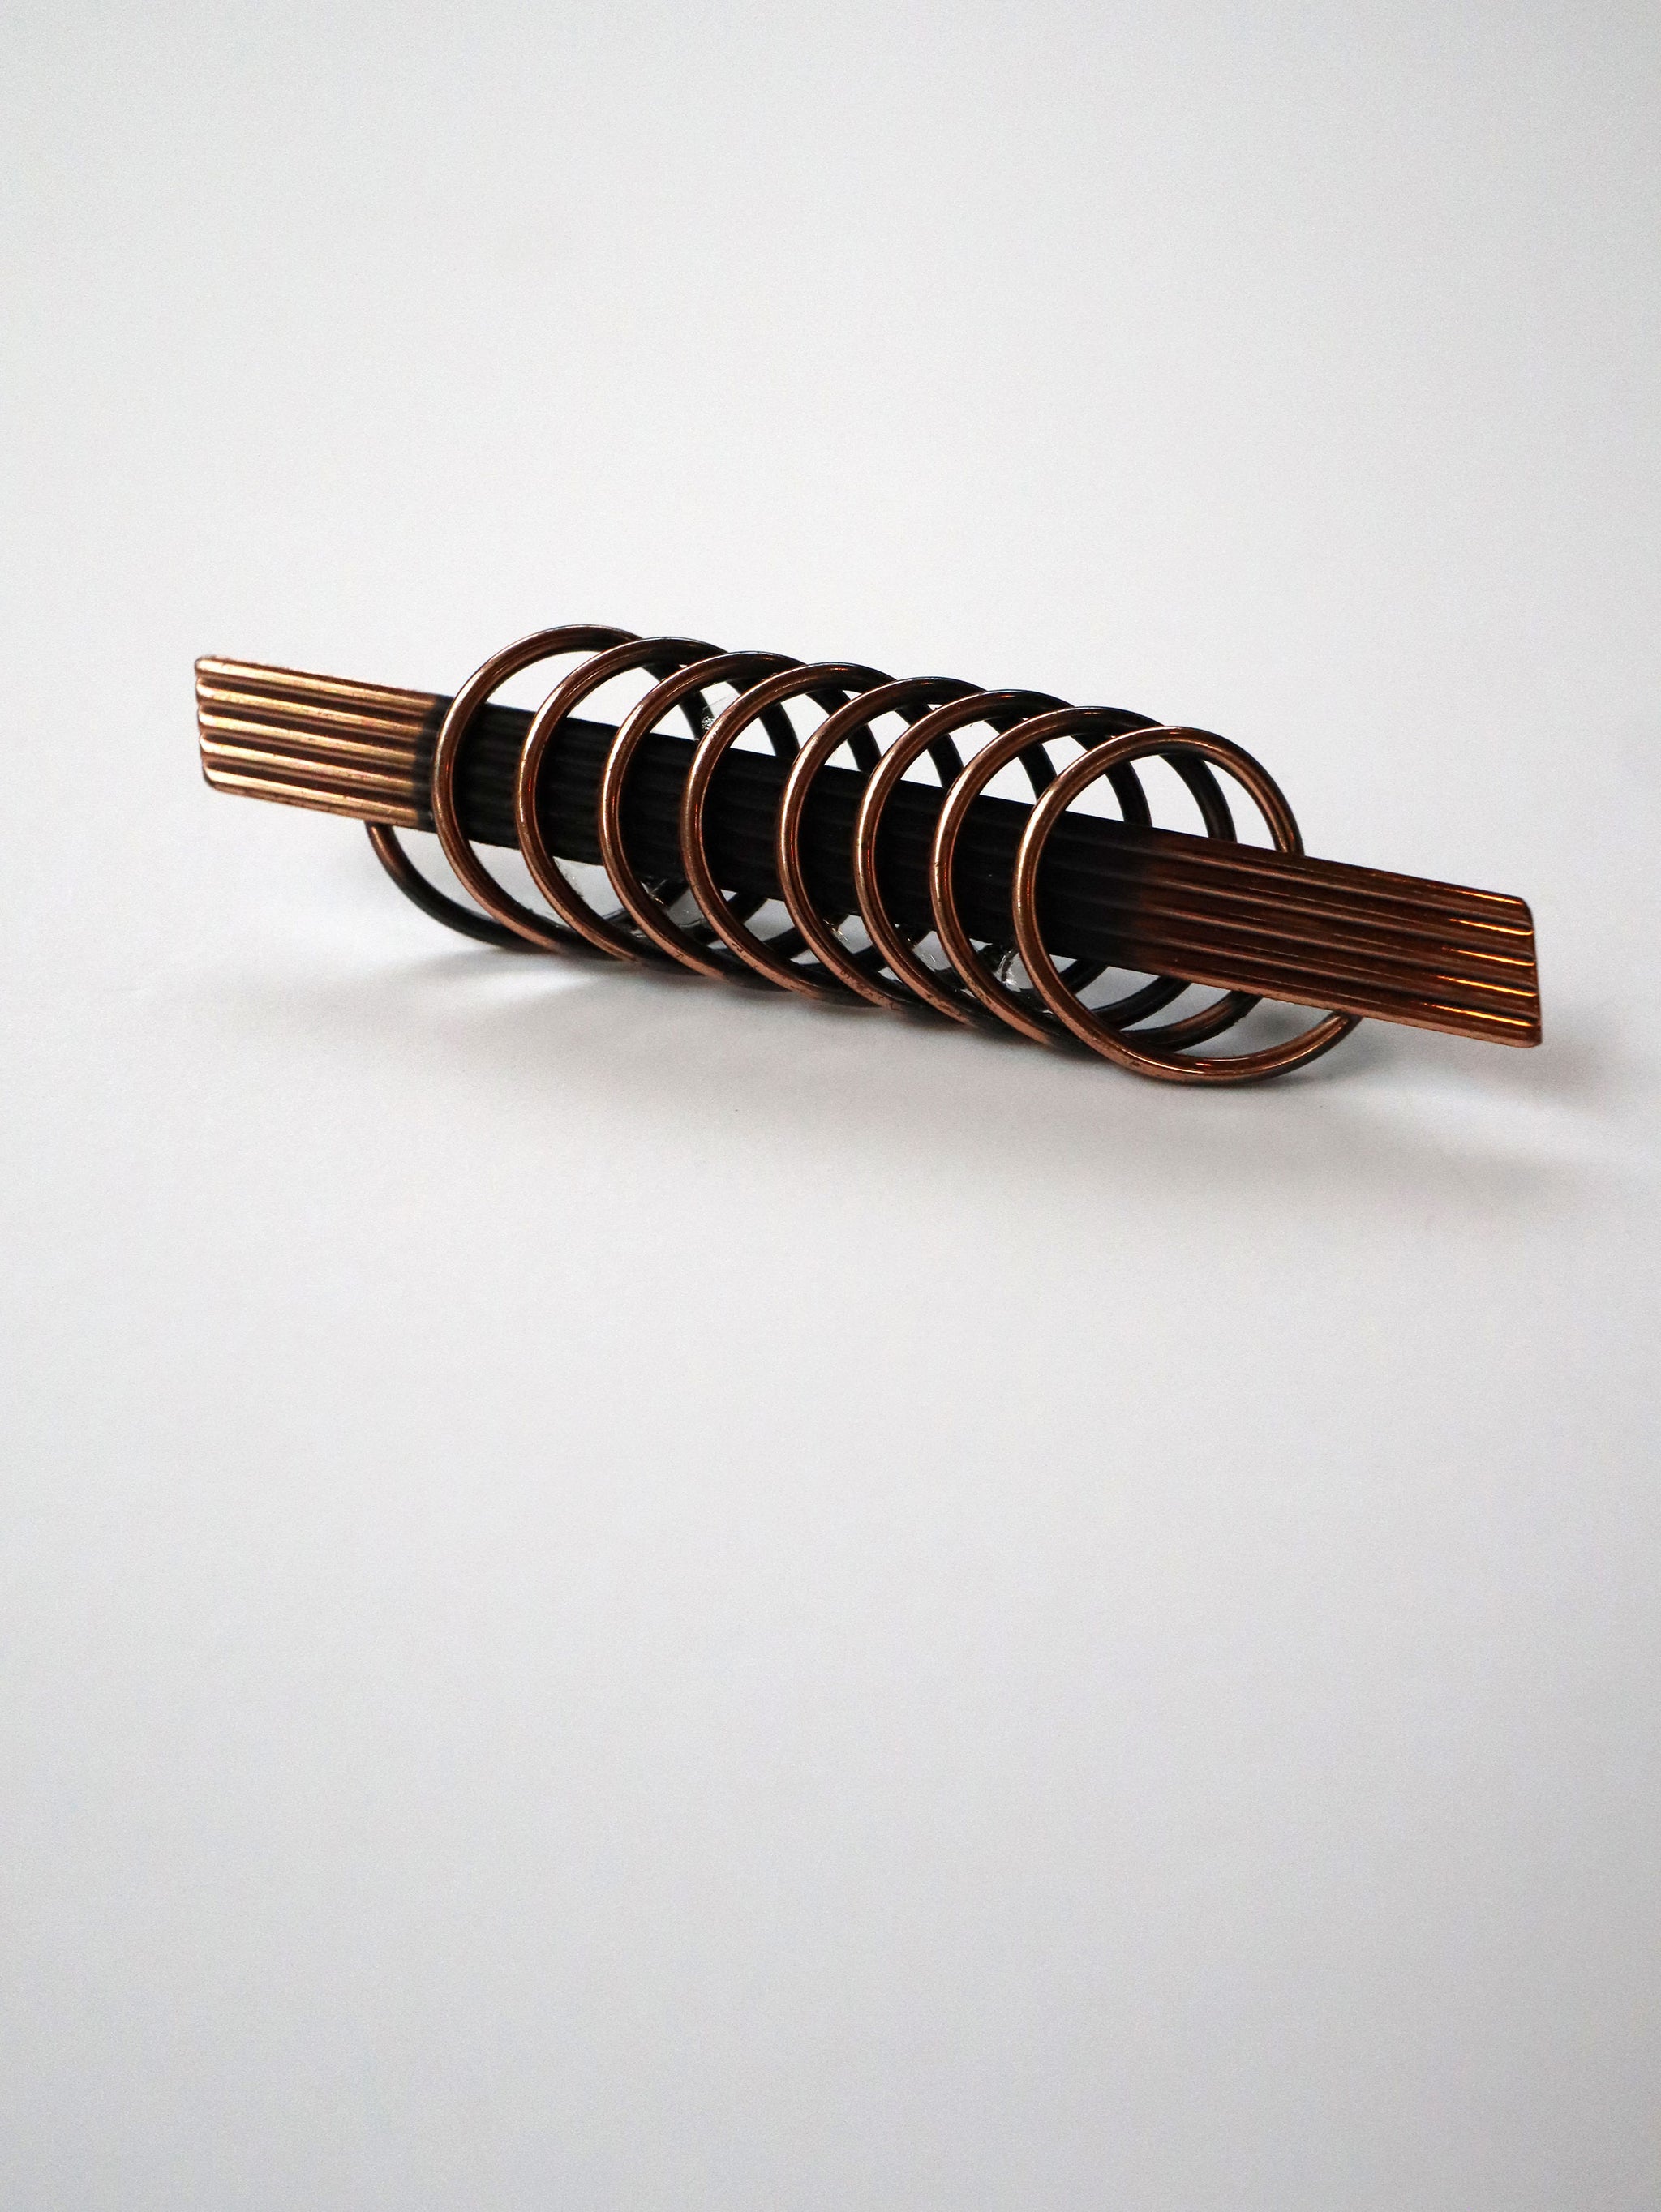 Vintage Midcentury Modern Coiled Copper Brooch / Pin